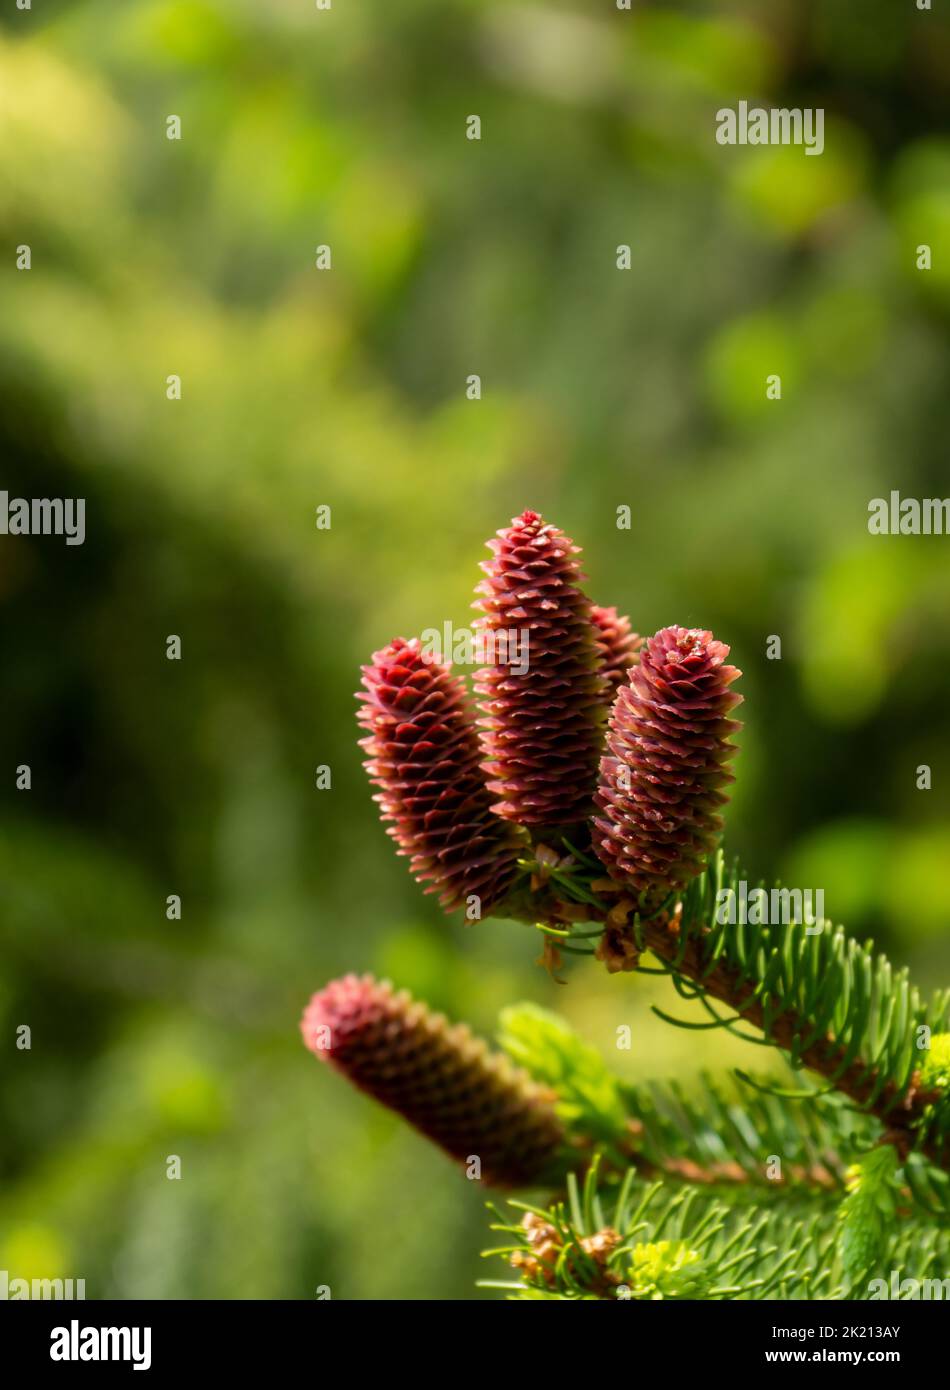 Beautiful violet pine cone, photo taken outside in suny day. Stock Photo